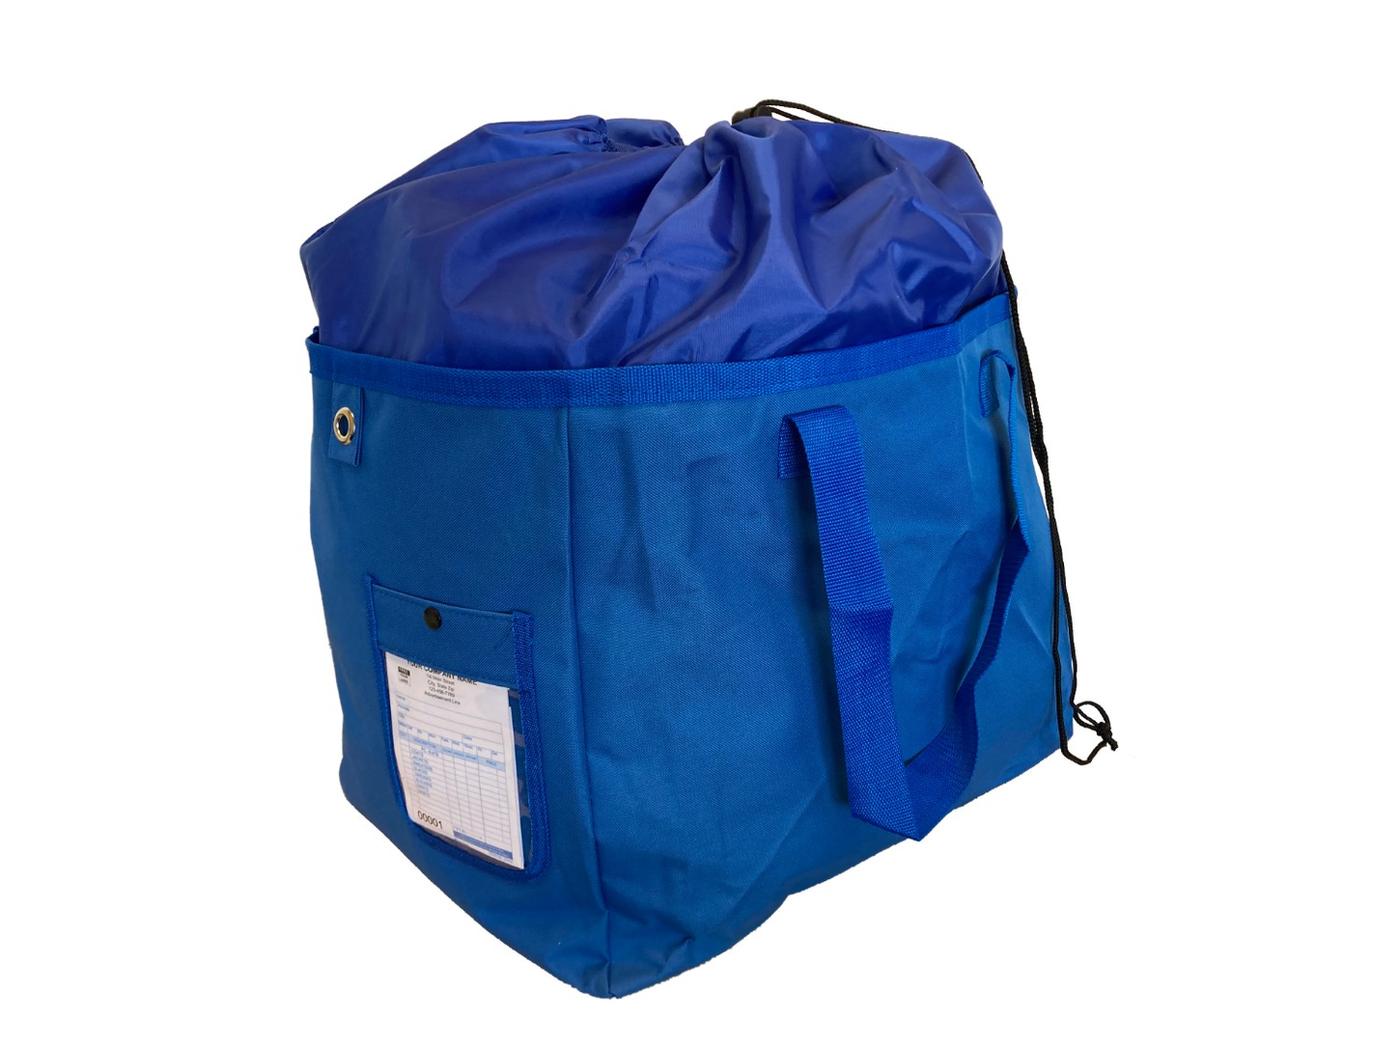 Large Wash and Fold Duffel Laundry Bag with Carry Handles